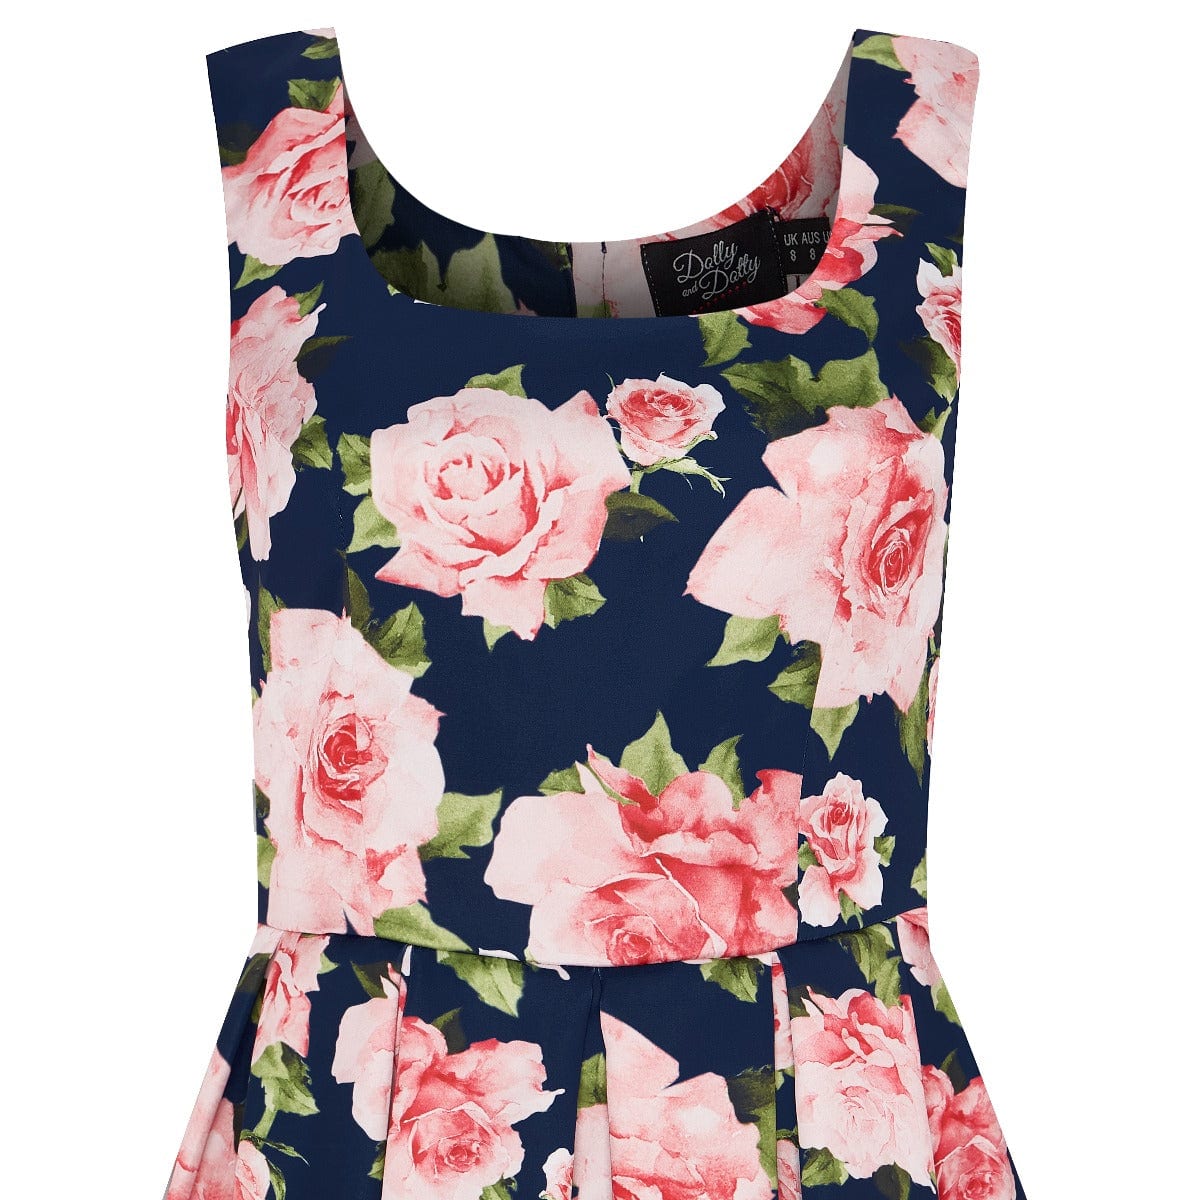 Amanda Navy Blue & Pink Roses Swing Dress - Dolly and Dotty